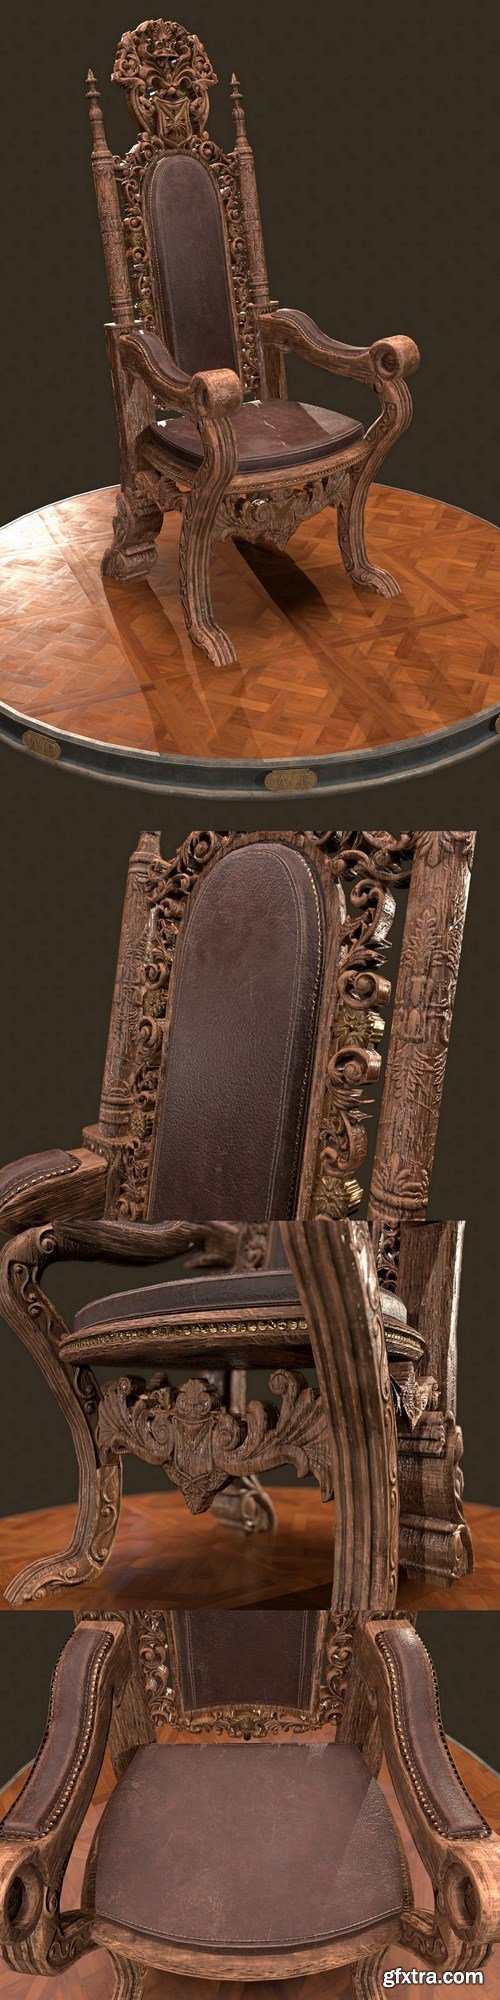 Medieval Chaire – 3D Model